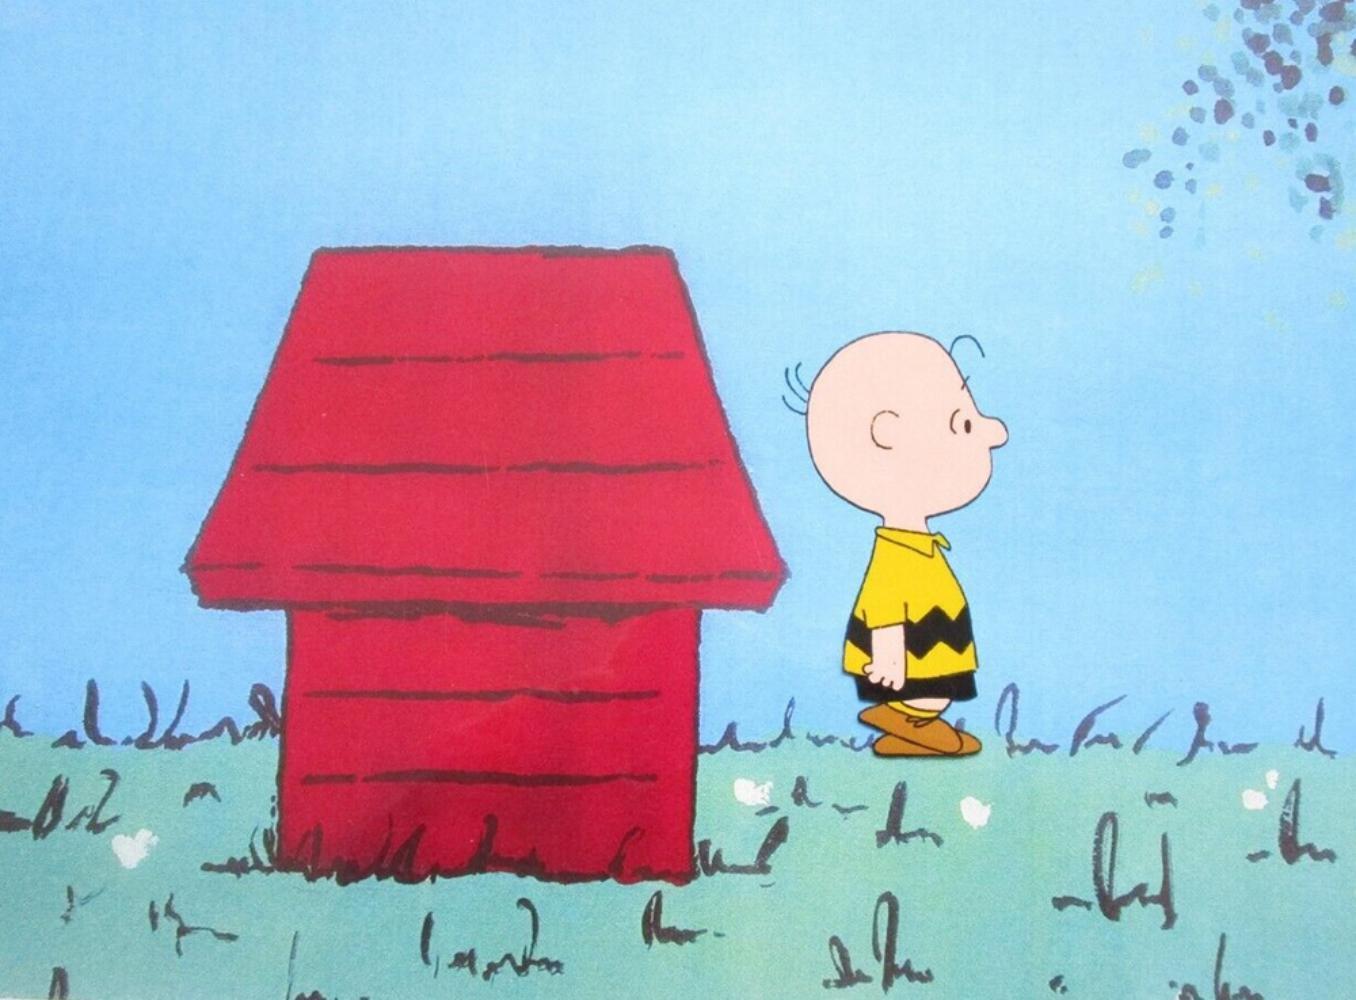 Charles M. Schulz Figurative Art - 'Charlie Brown Peanuts' Original Animation Production Cel & Drawing 1983